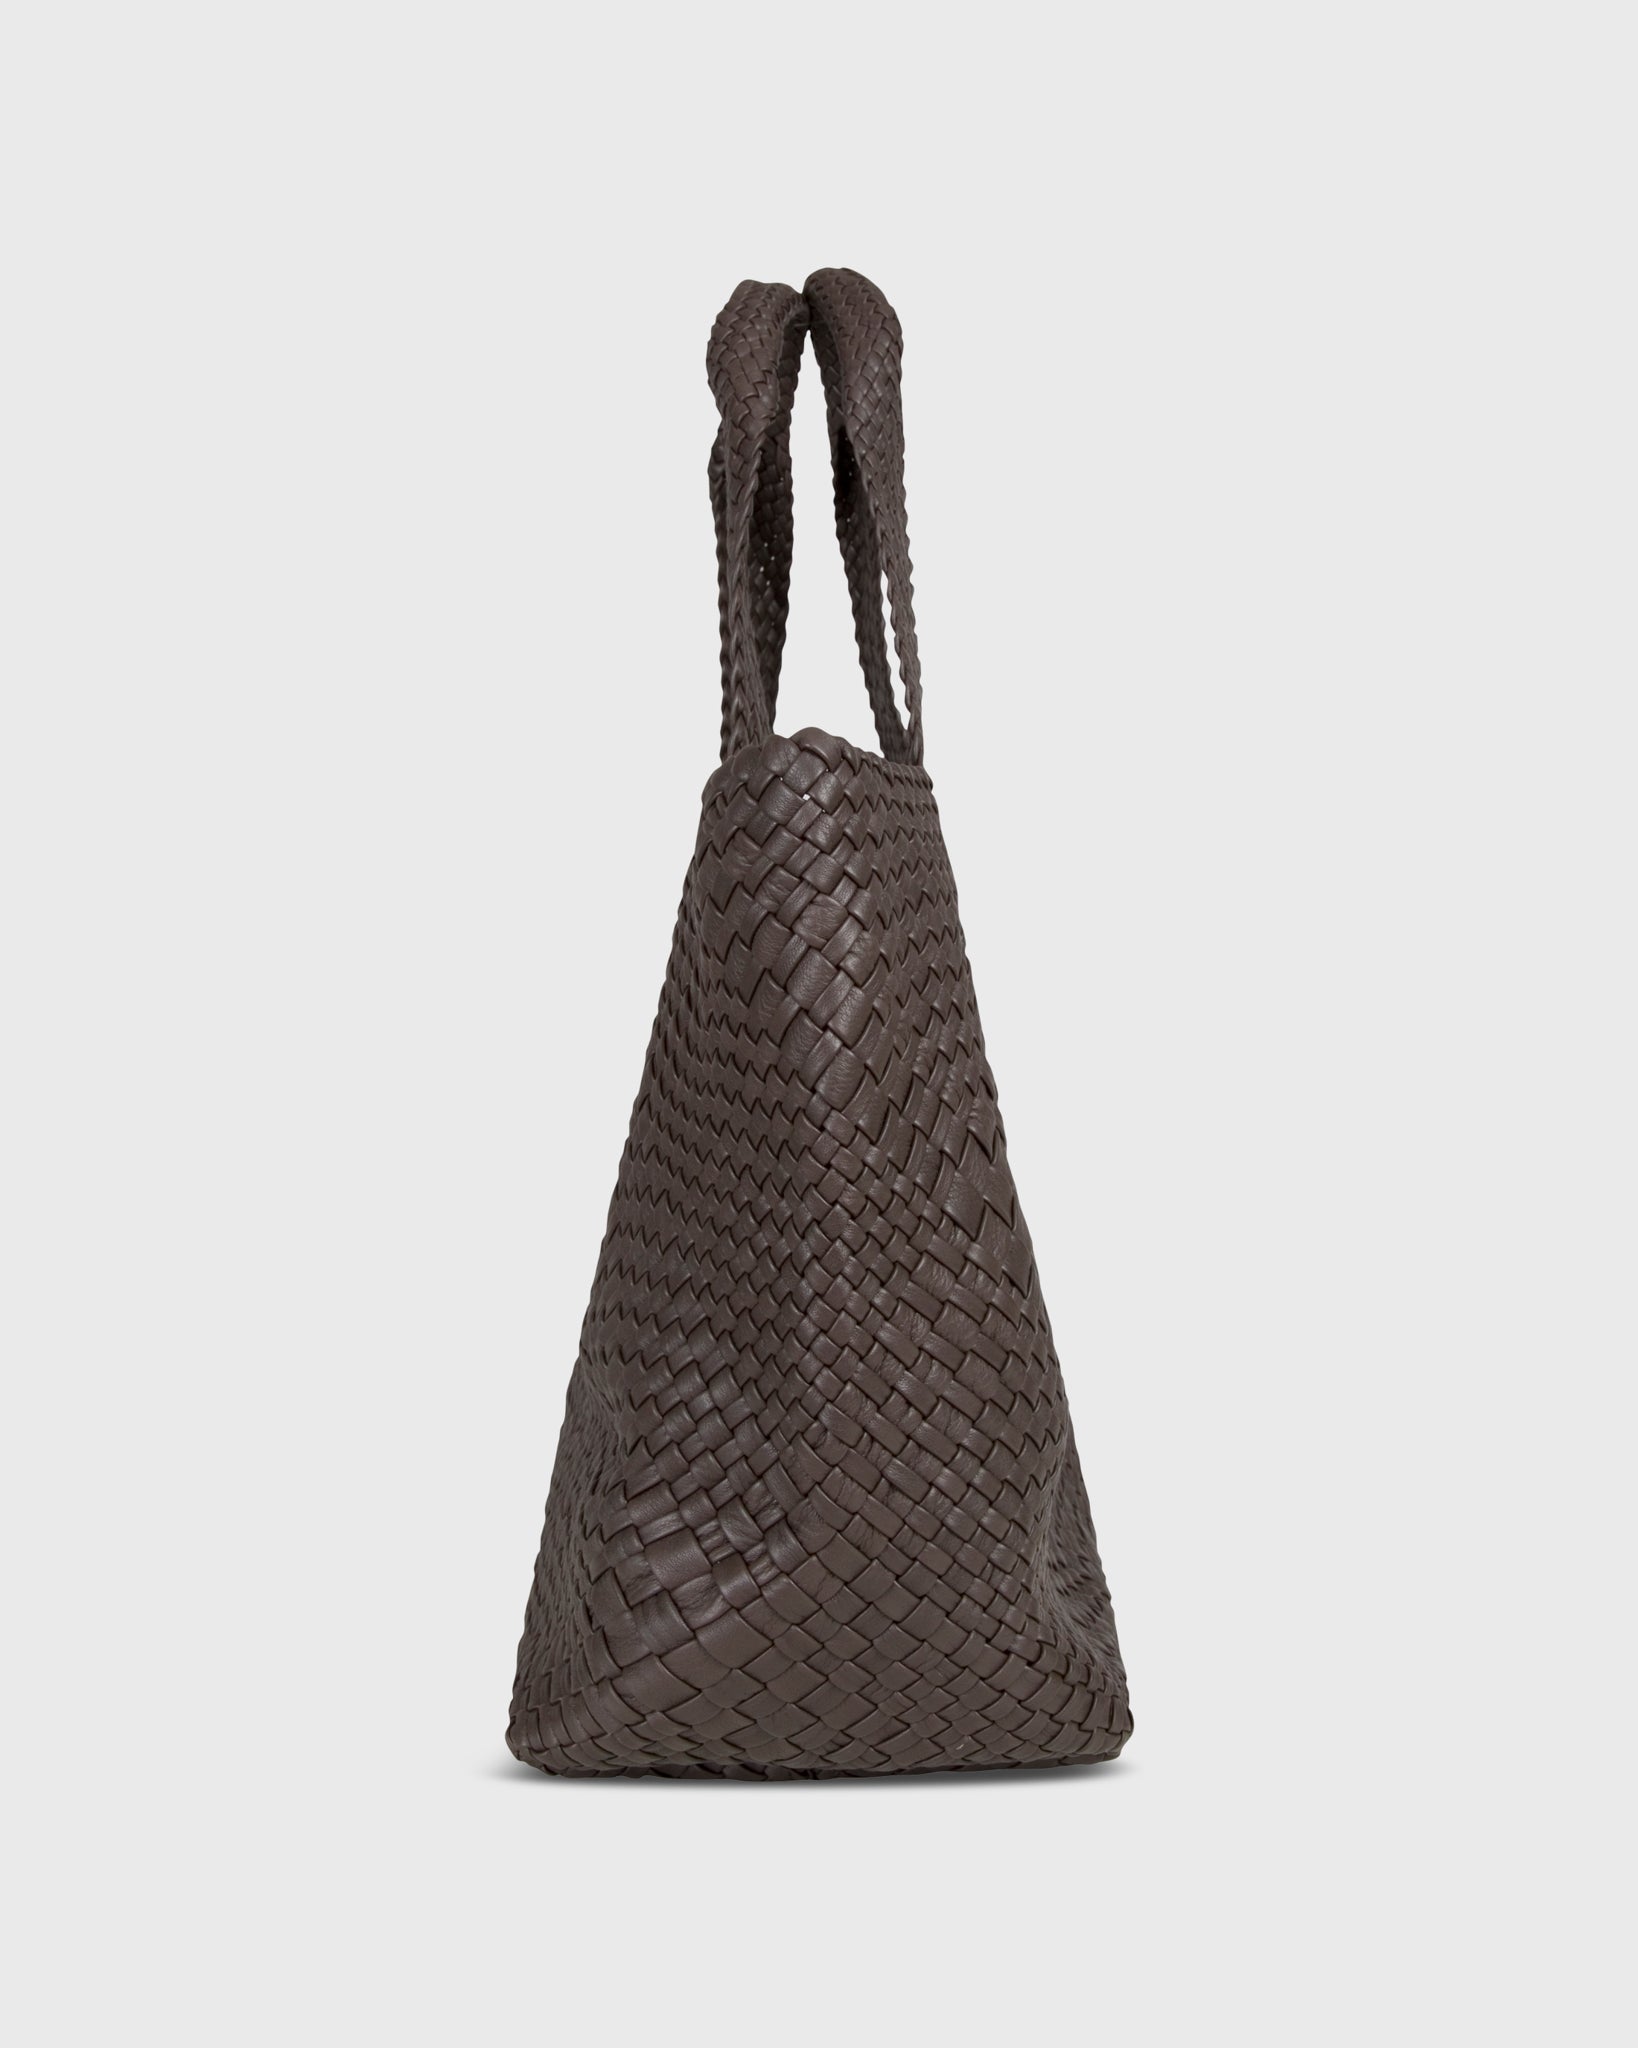 Mercato Handwoven Tote in Chocolate Leather